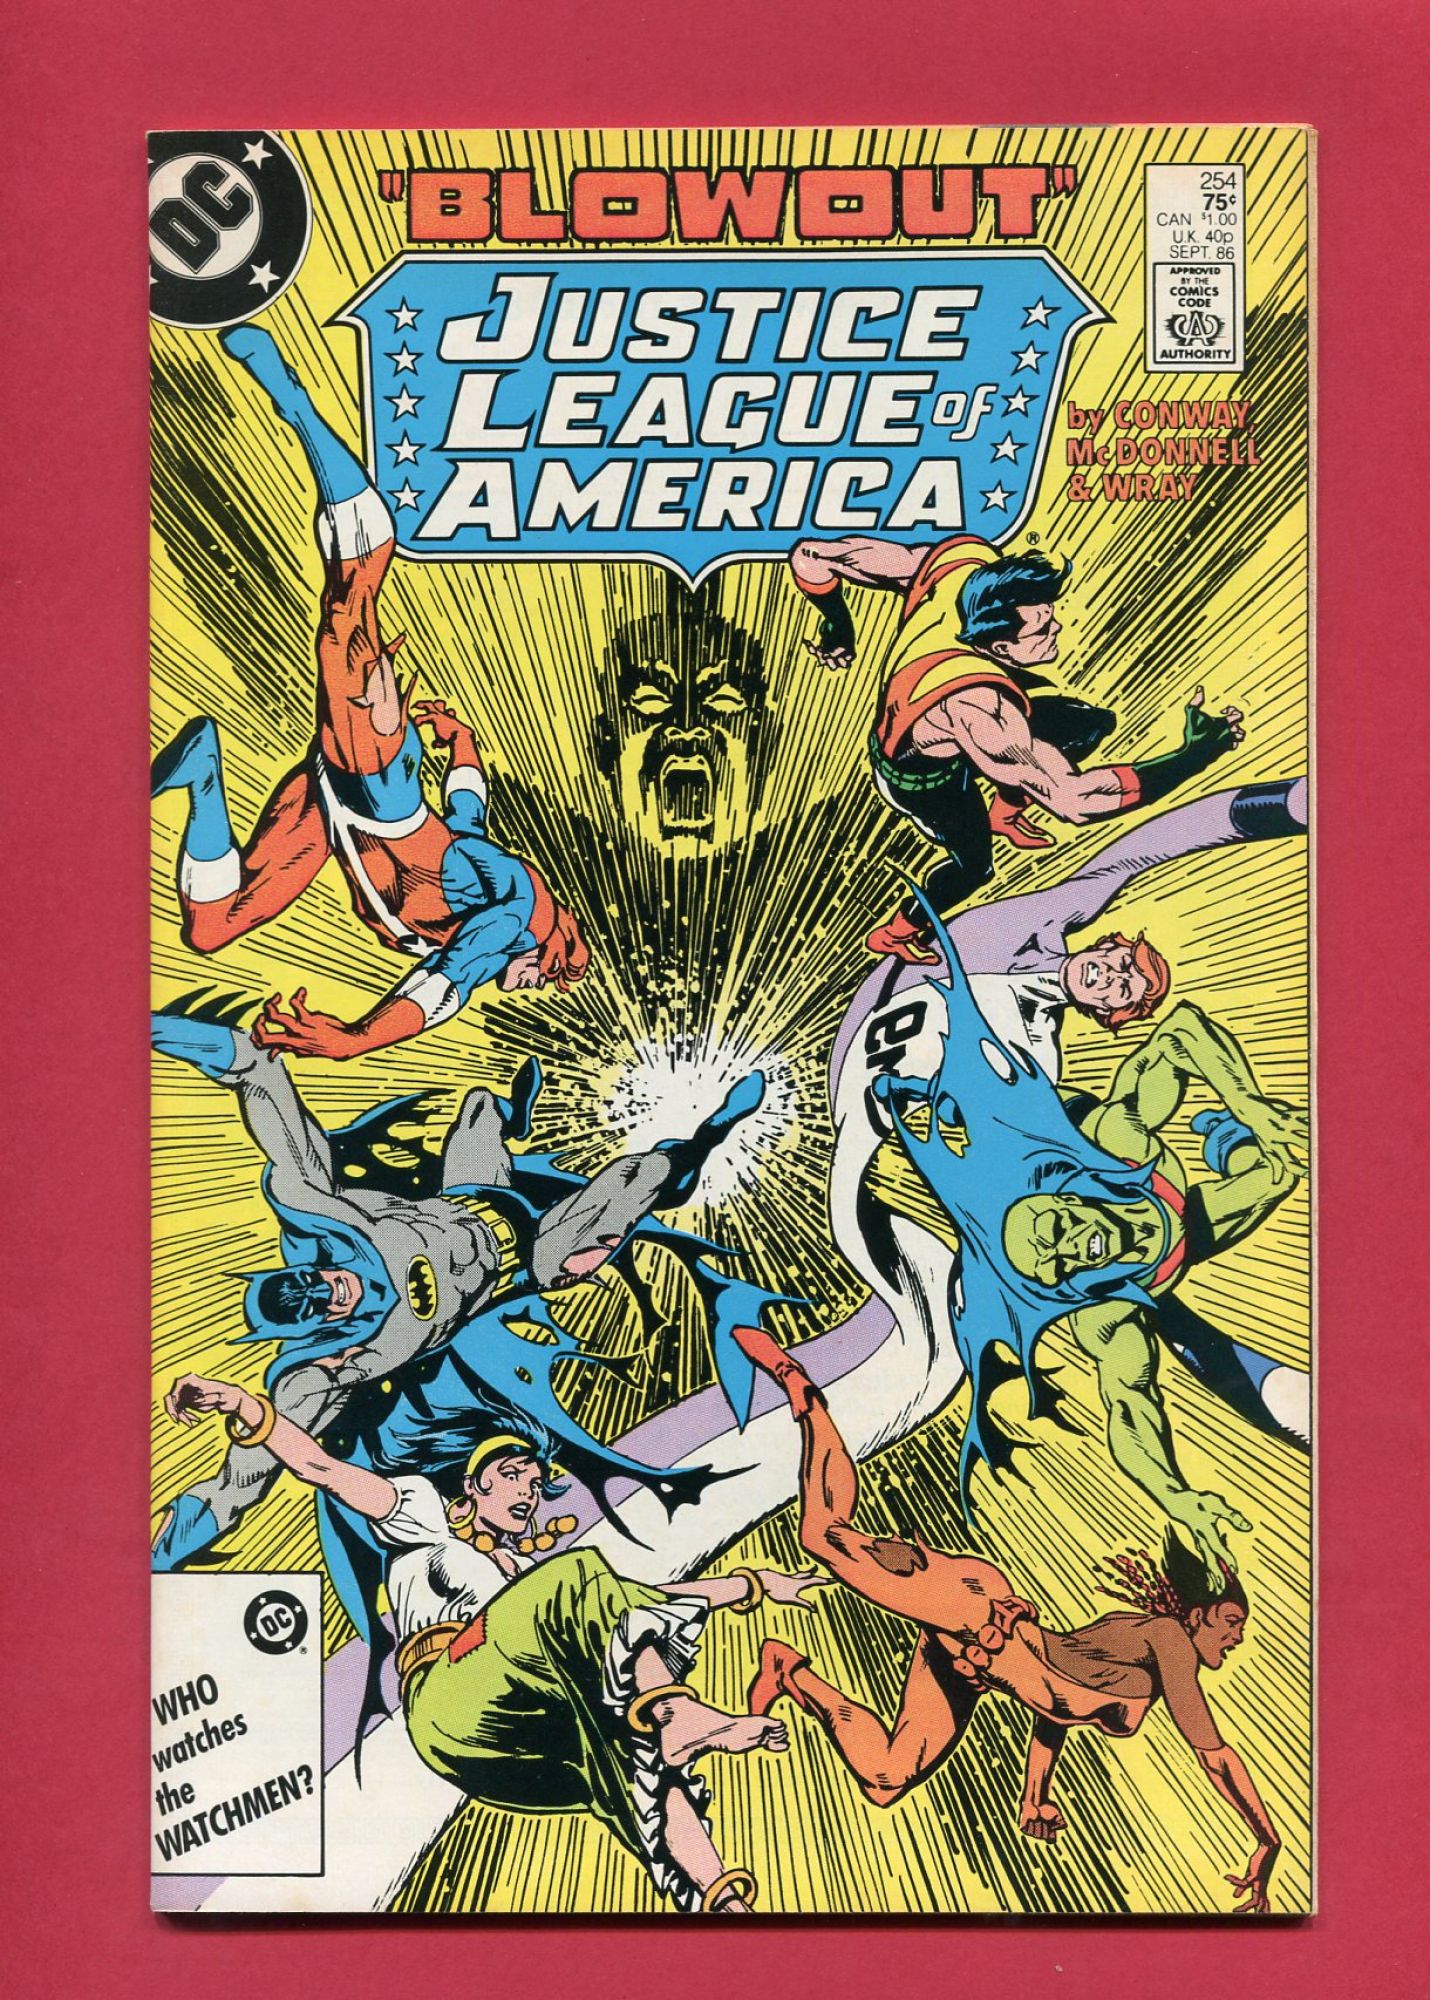 Justice League of America (Volume 1 1960) #254, Sep 1986, 8.5 VF+